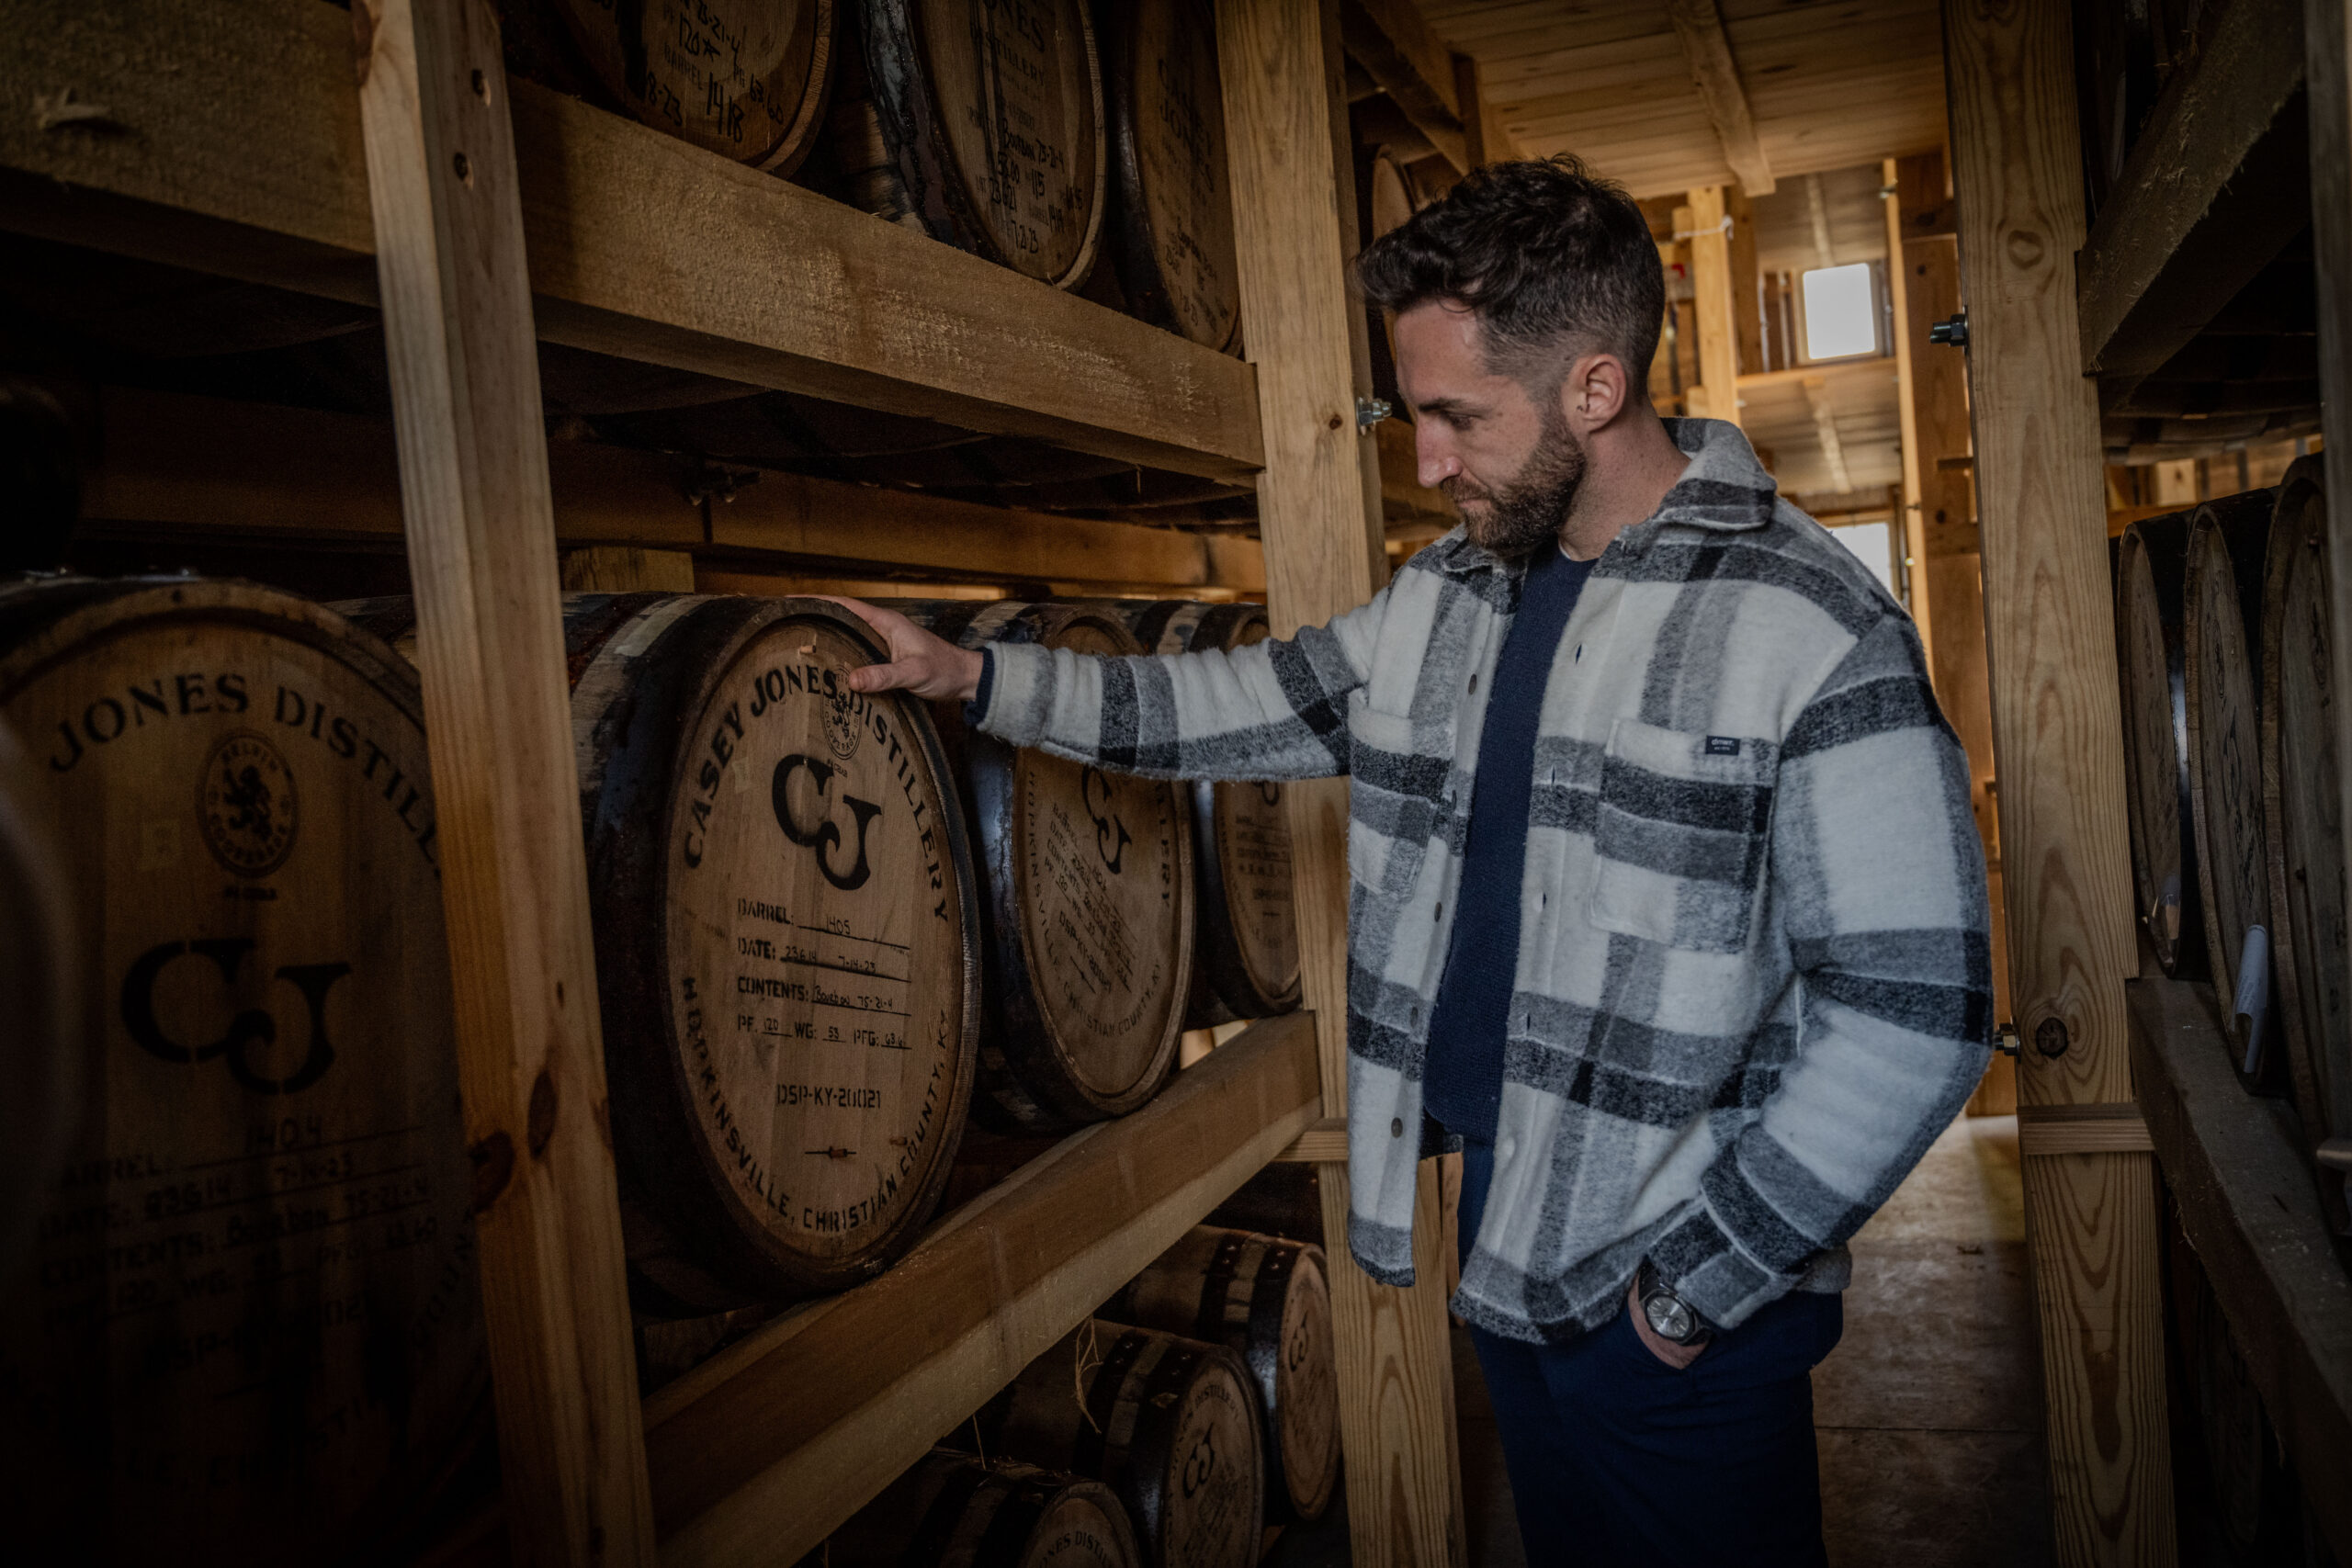 Barrel Global Launches New “Kentucky Bourbon Retreat” Whiskey Experience